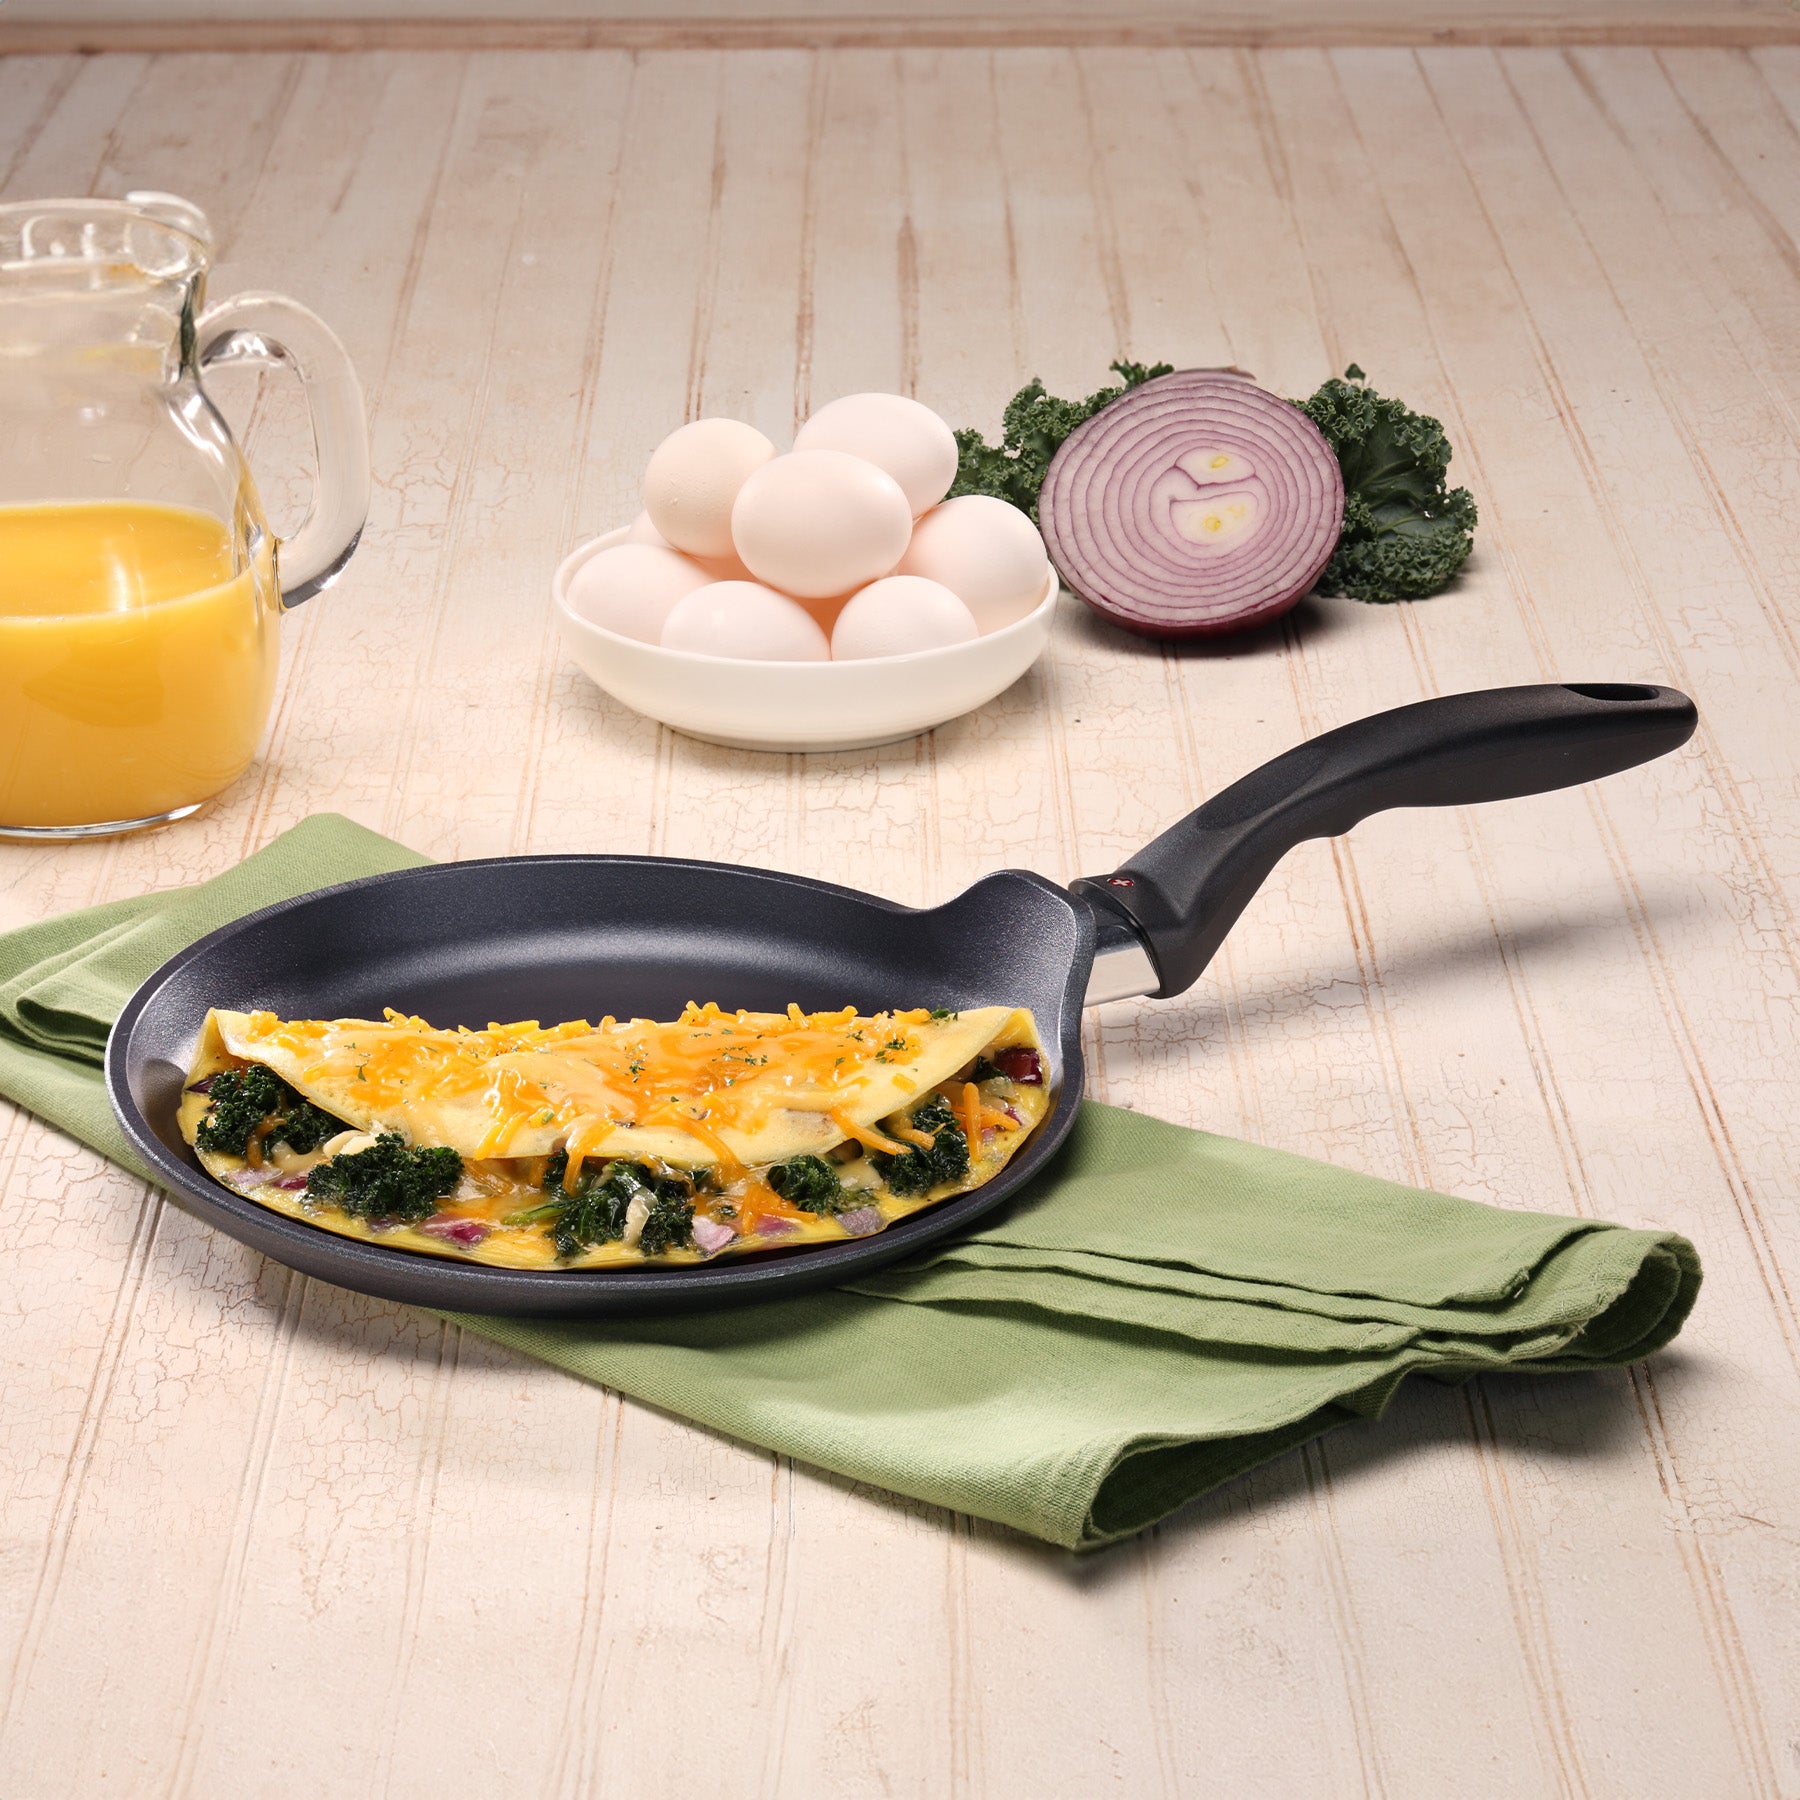 HD Nonstick Crepe Pan - Induction in use on dining room table